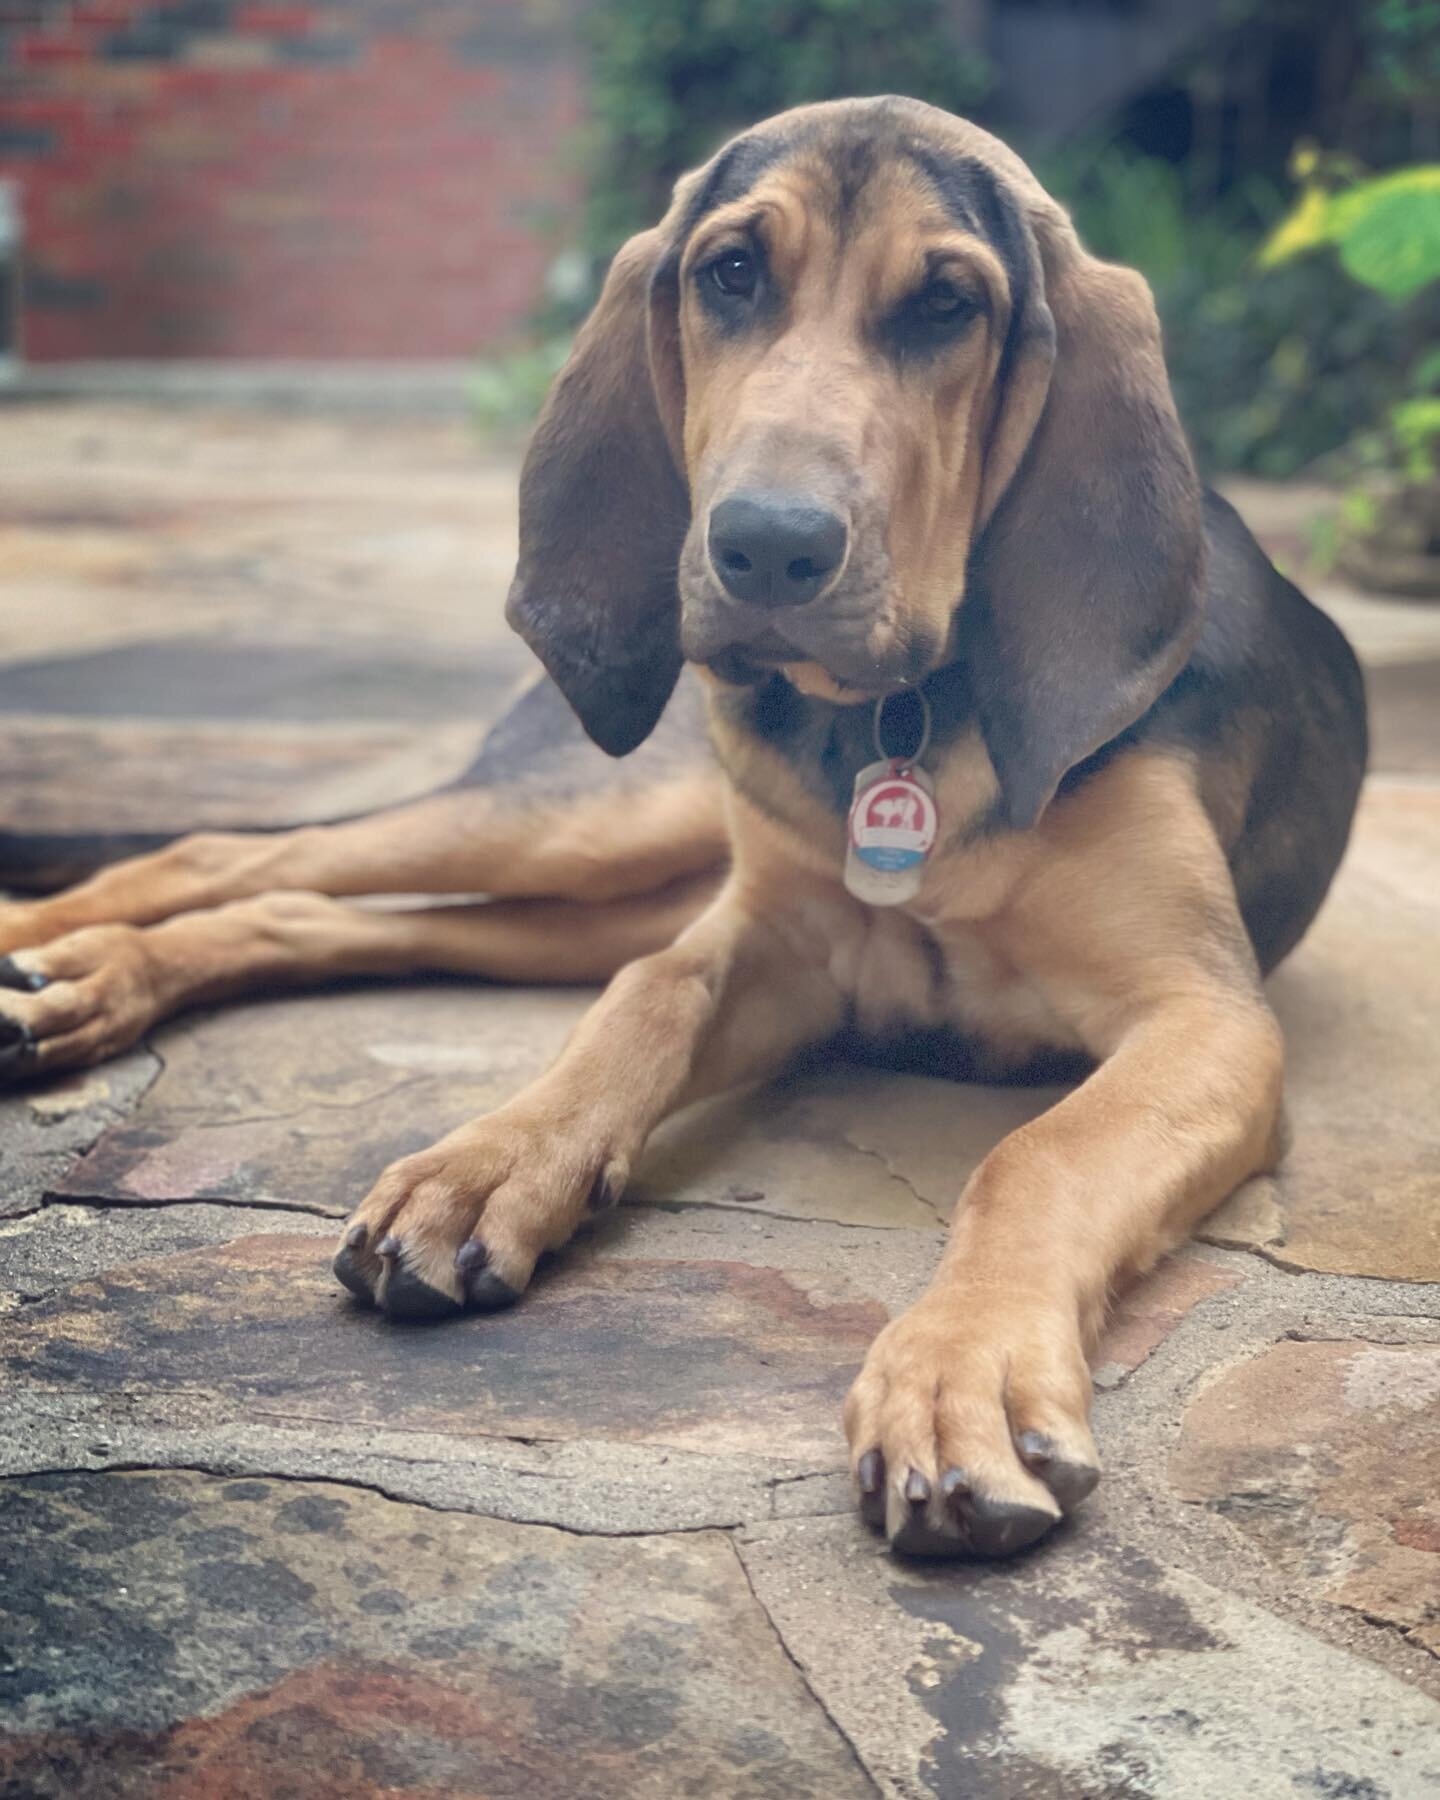 I do not get on the socials much these days but thought it was about time to share that on Memorial Day weekend we added a new puppy to our pack! Meet Riley Jean Montgomery, now five months old, from the South Central Bloodhound Rescue. She can be a 